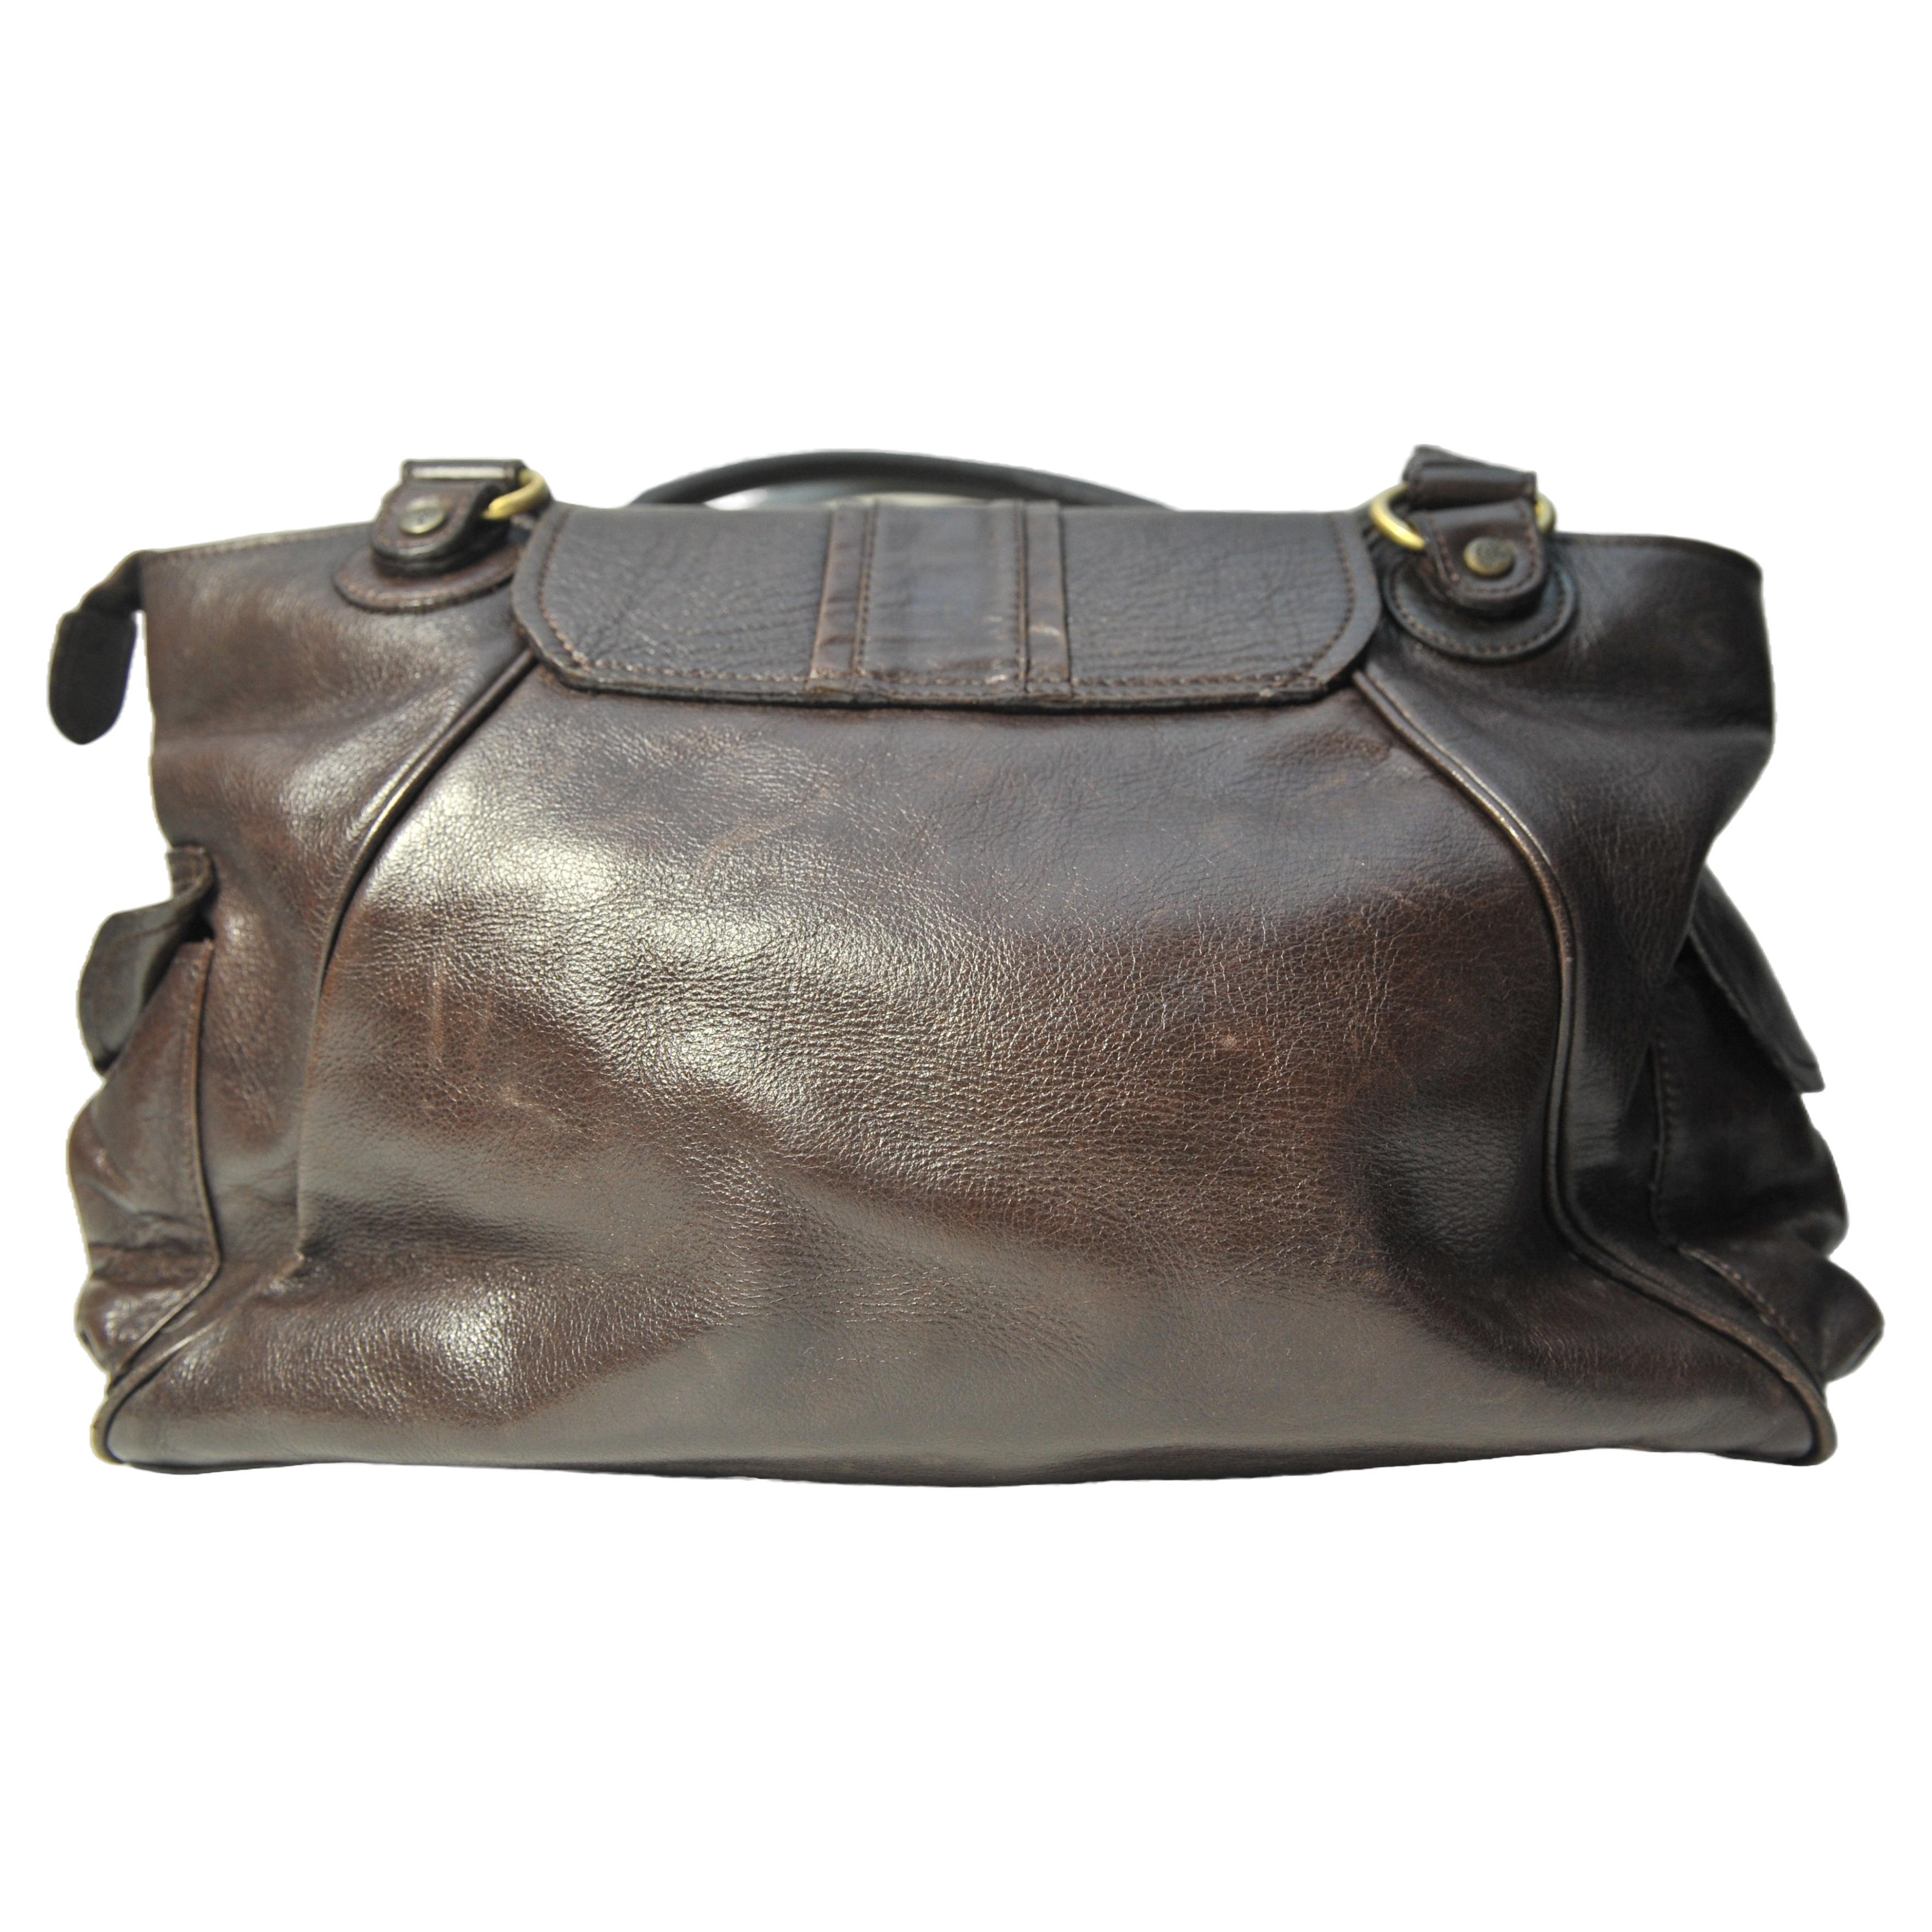 Modern Mulberry Brown Leather Ladies Handbag With Original Maroon Mulberry Dust Bag For Sale